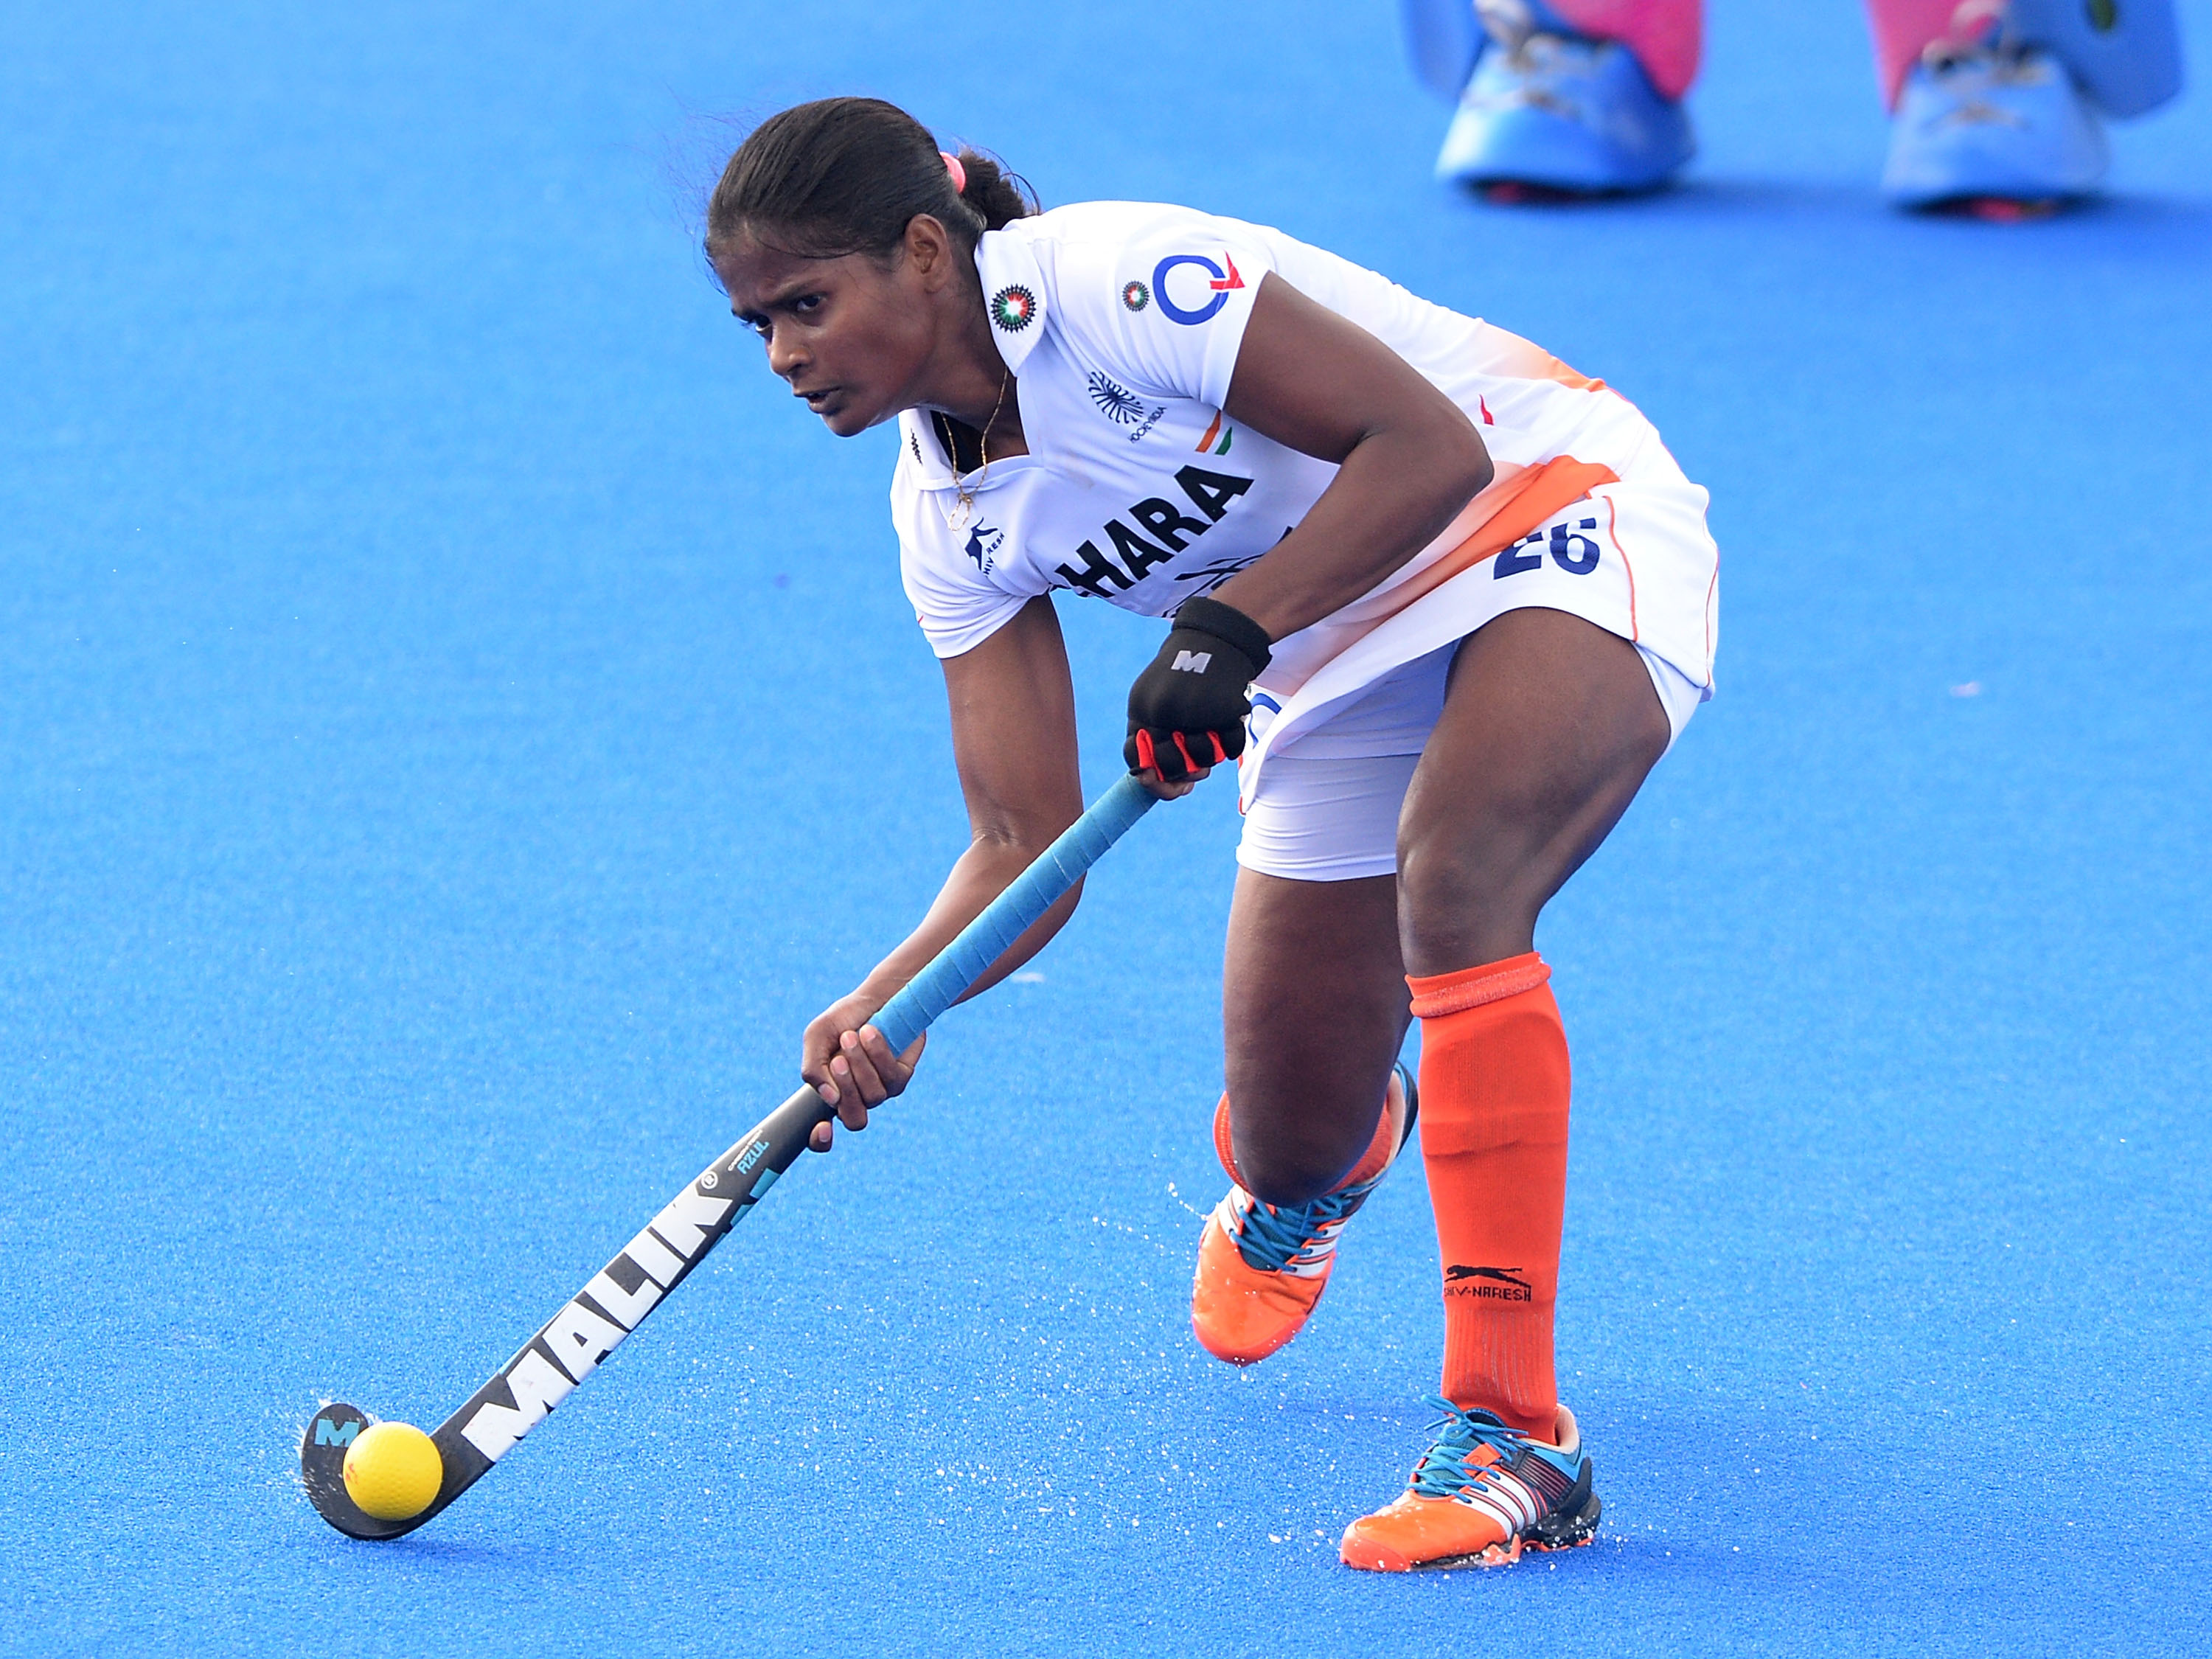 If we win medals, then it will inspire others to play Hockey : Sunita Lakra